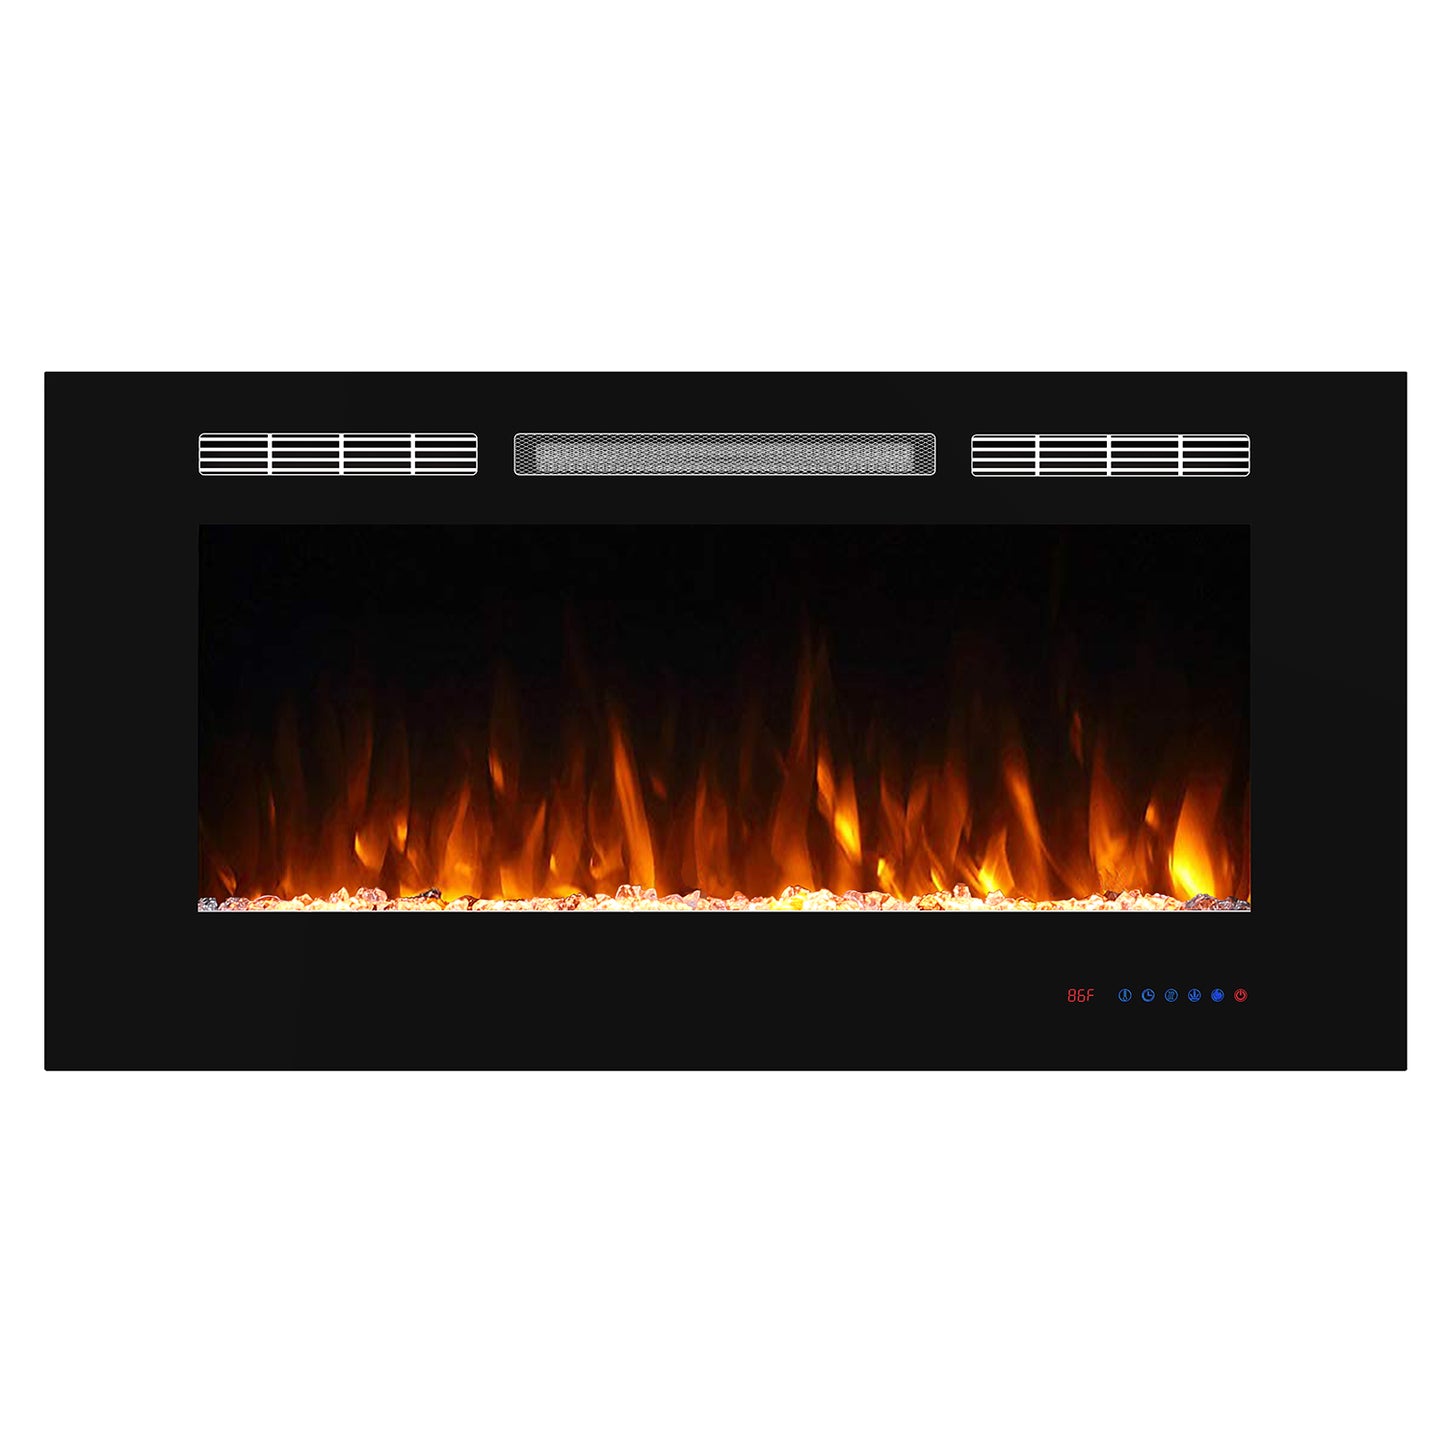 Recessed Electric Fireplace,750/1500W, Black